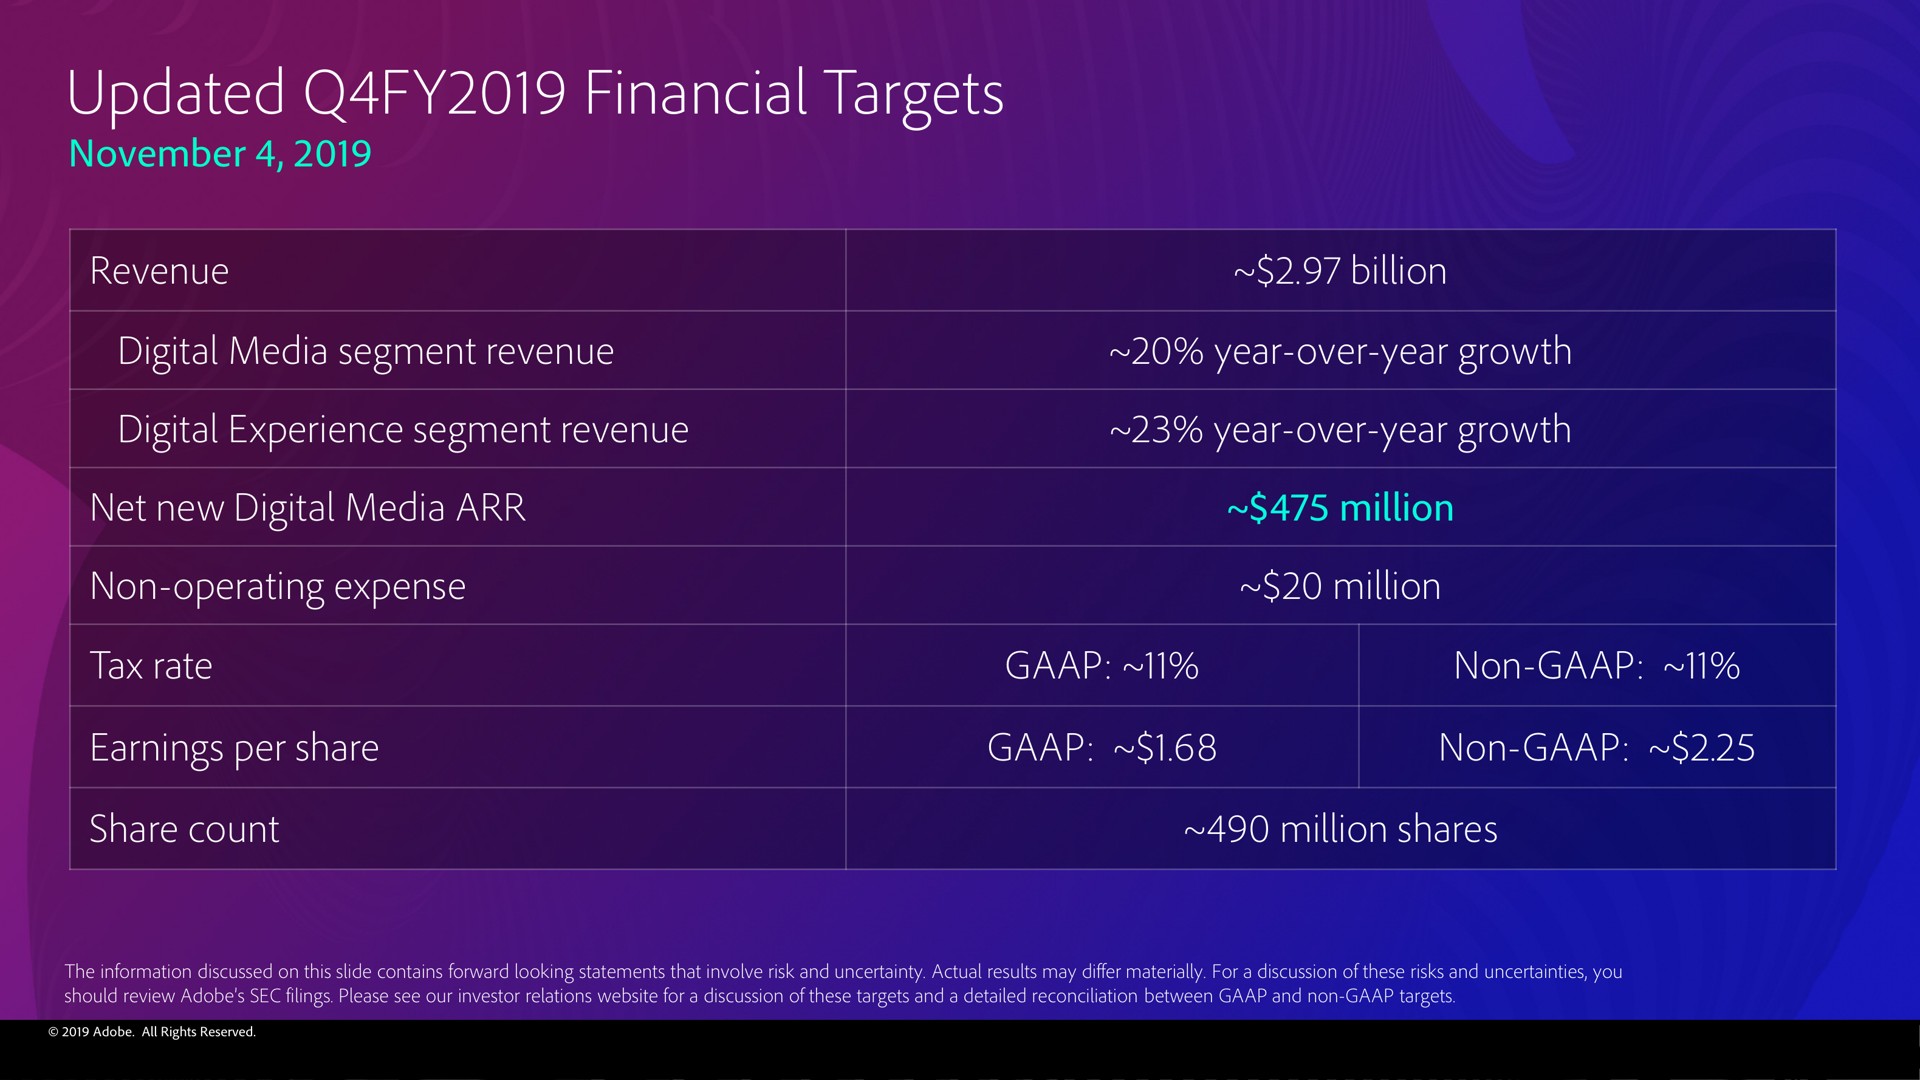 updated financial targets | Adobe